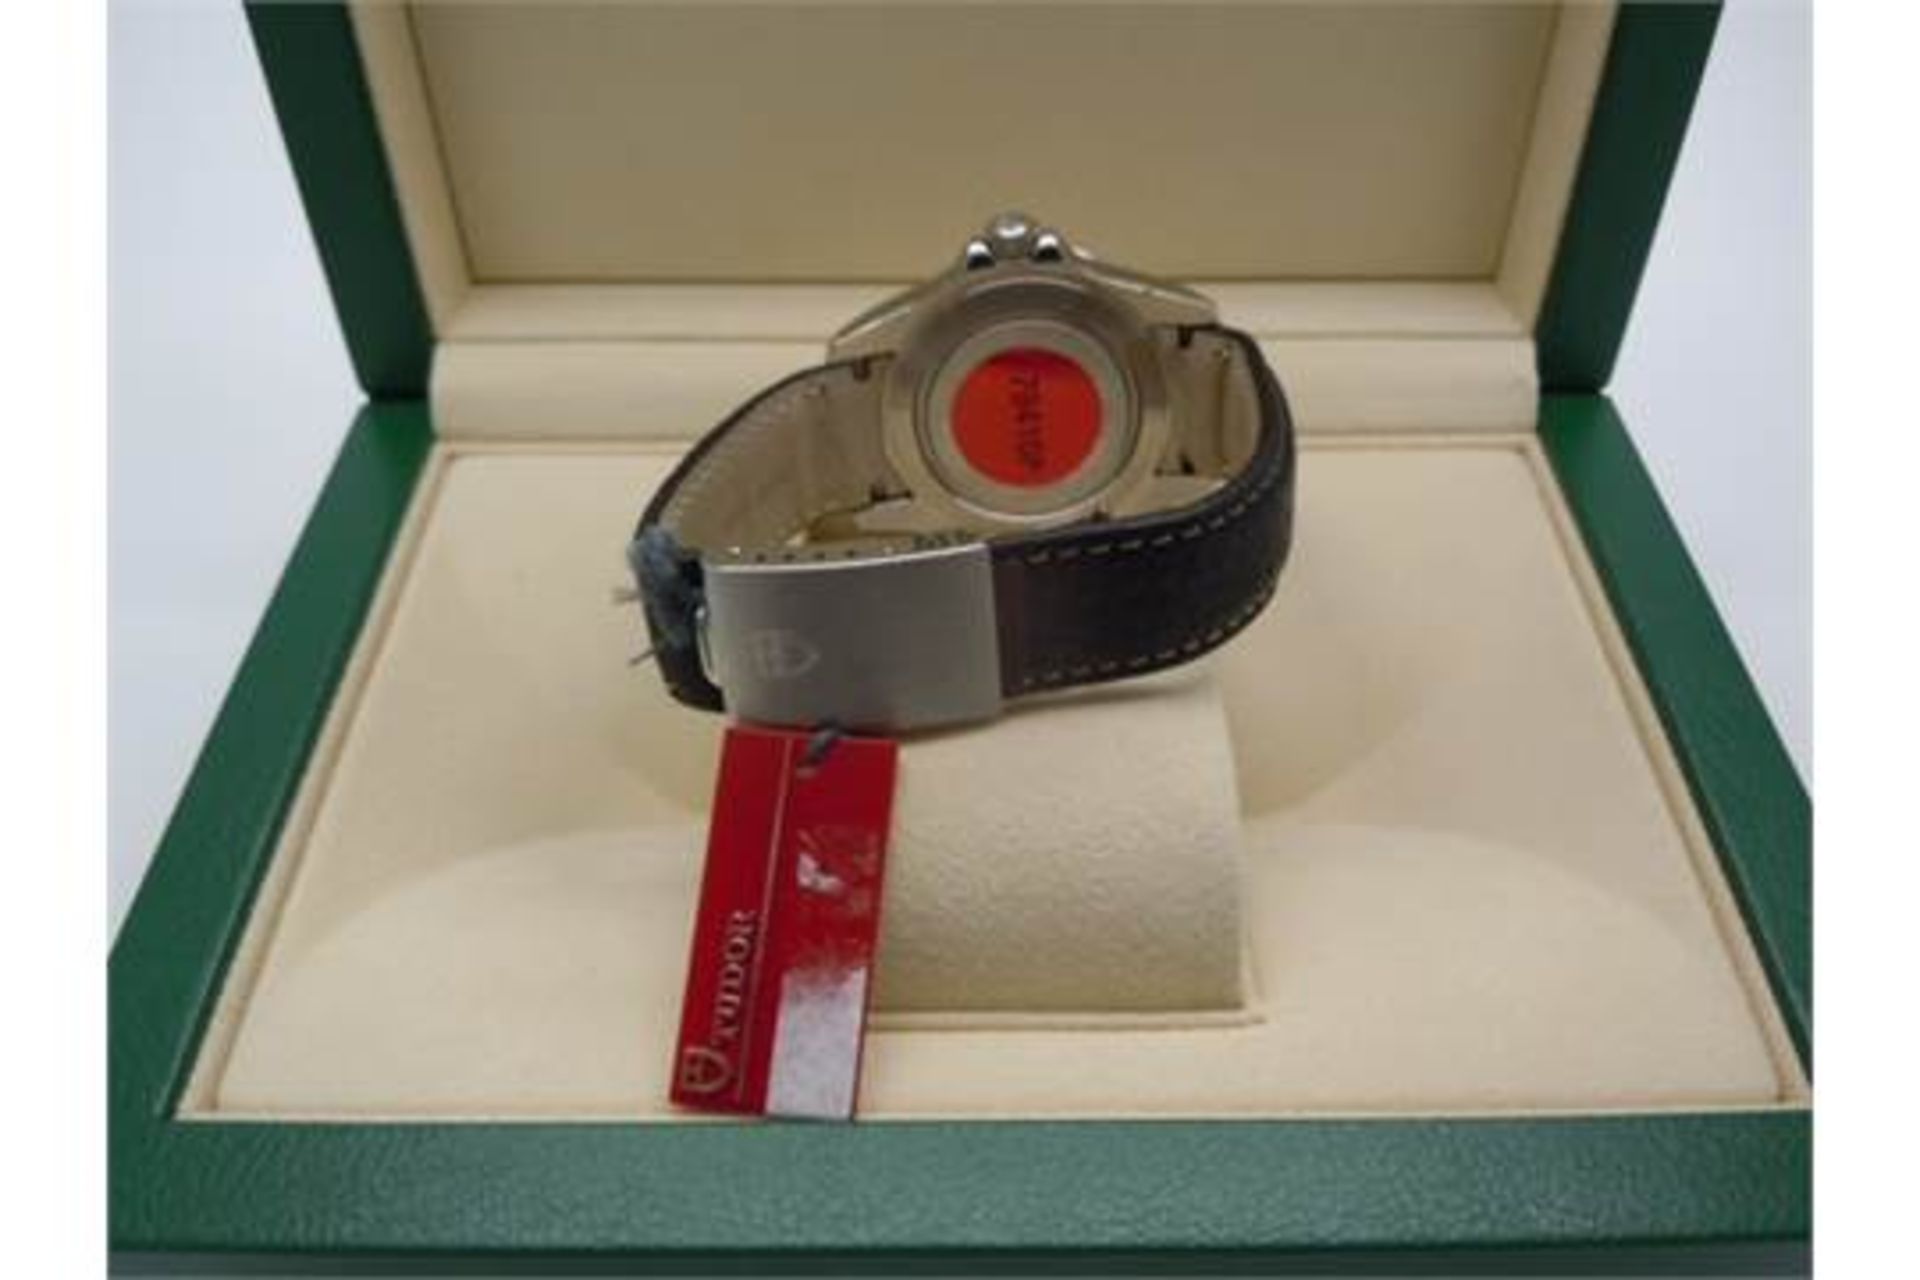 BRAND NEW OLD STOCK TUDOR PRINCE DATE ROTOR SELF WINDING WATCH STILL WITH STICKERS BOXED - Image 4 of 6